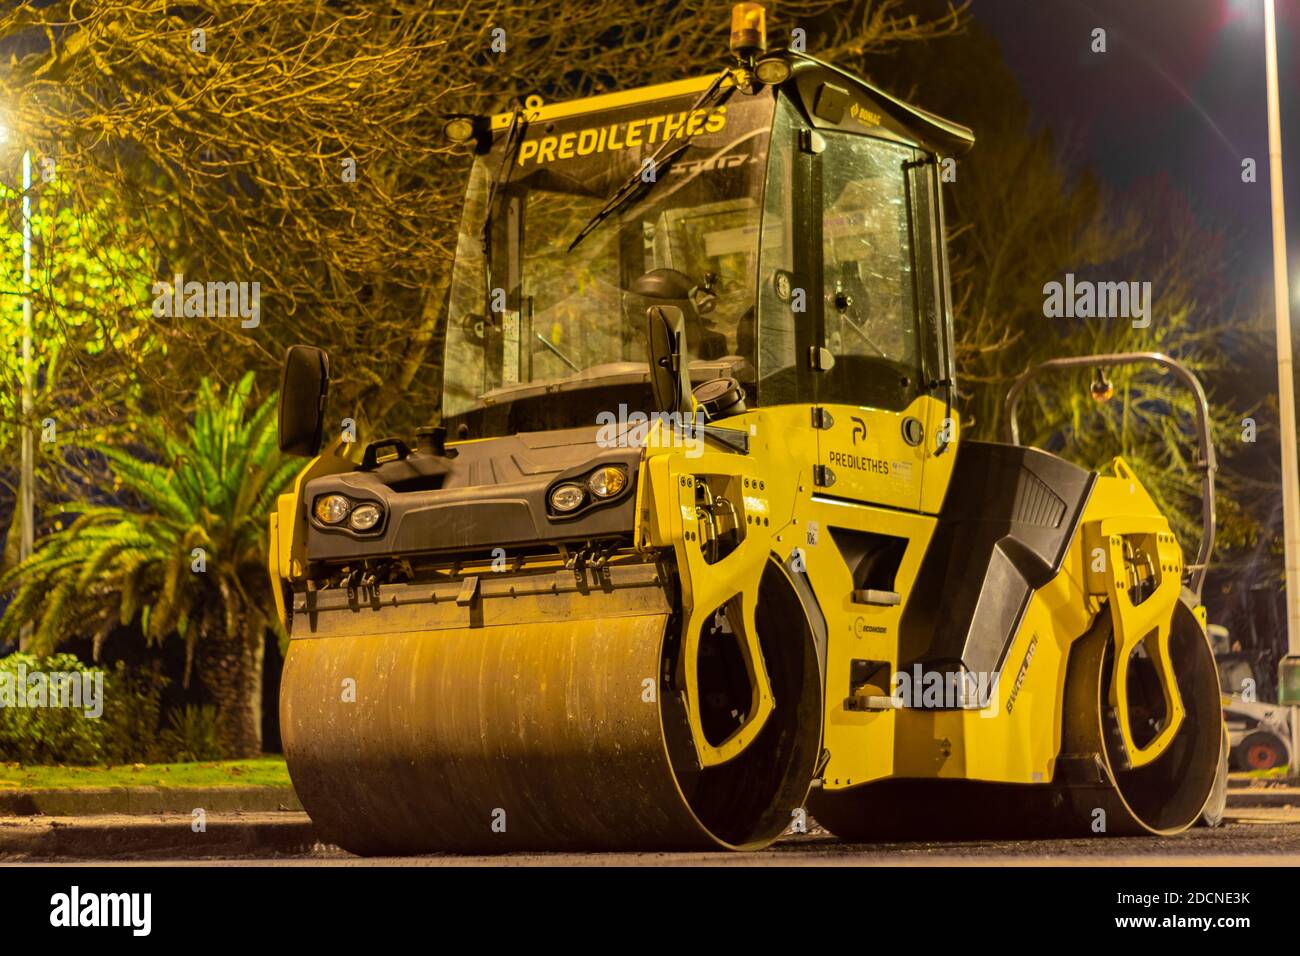 Bomag roller, road construction heavy machinery at night Stock Photo